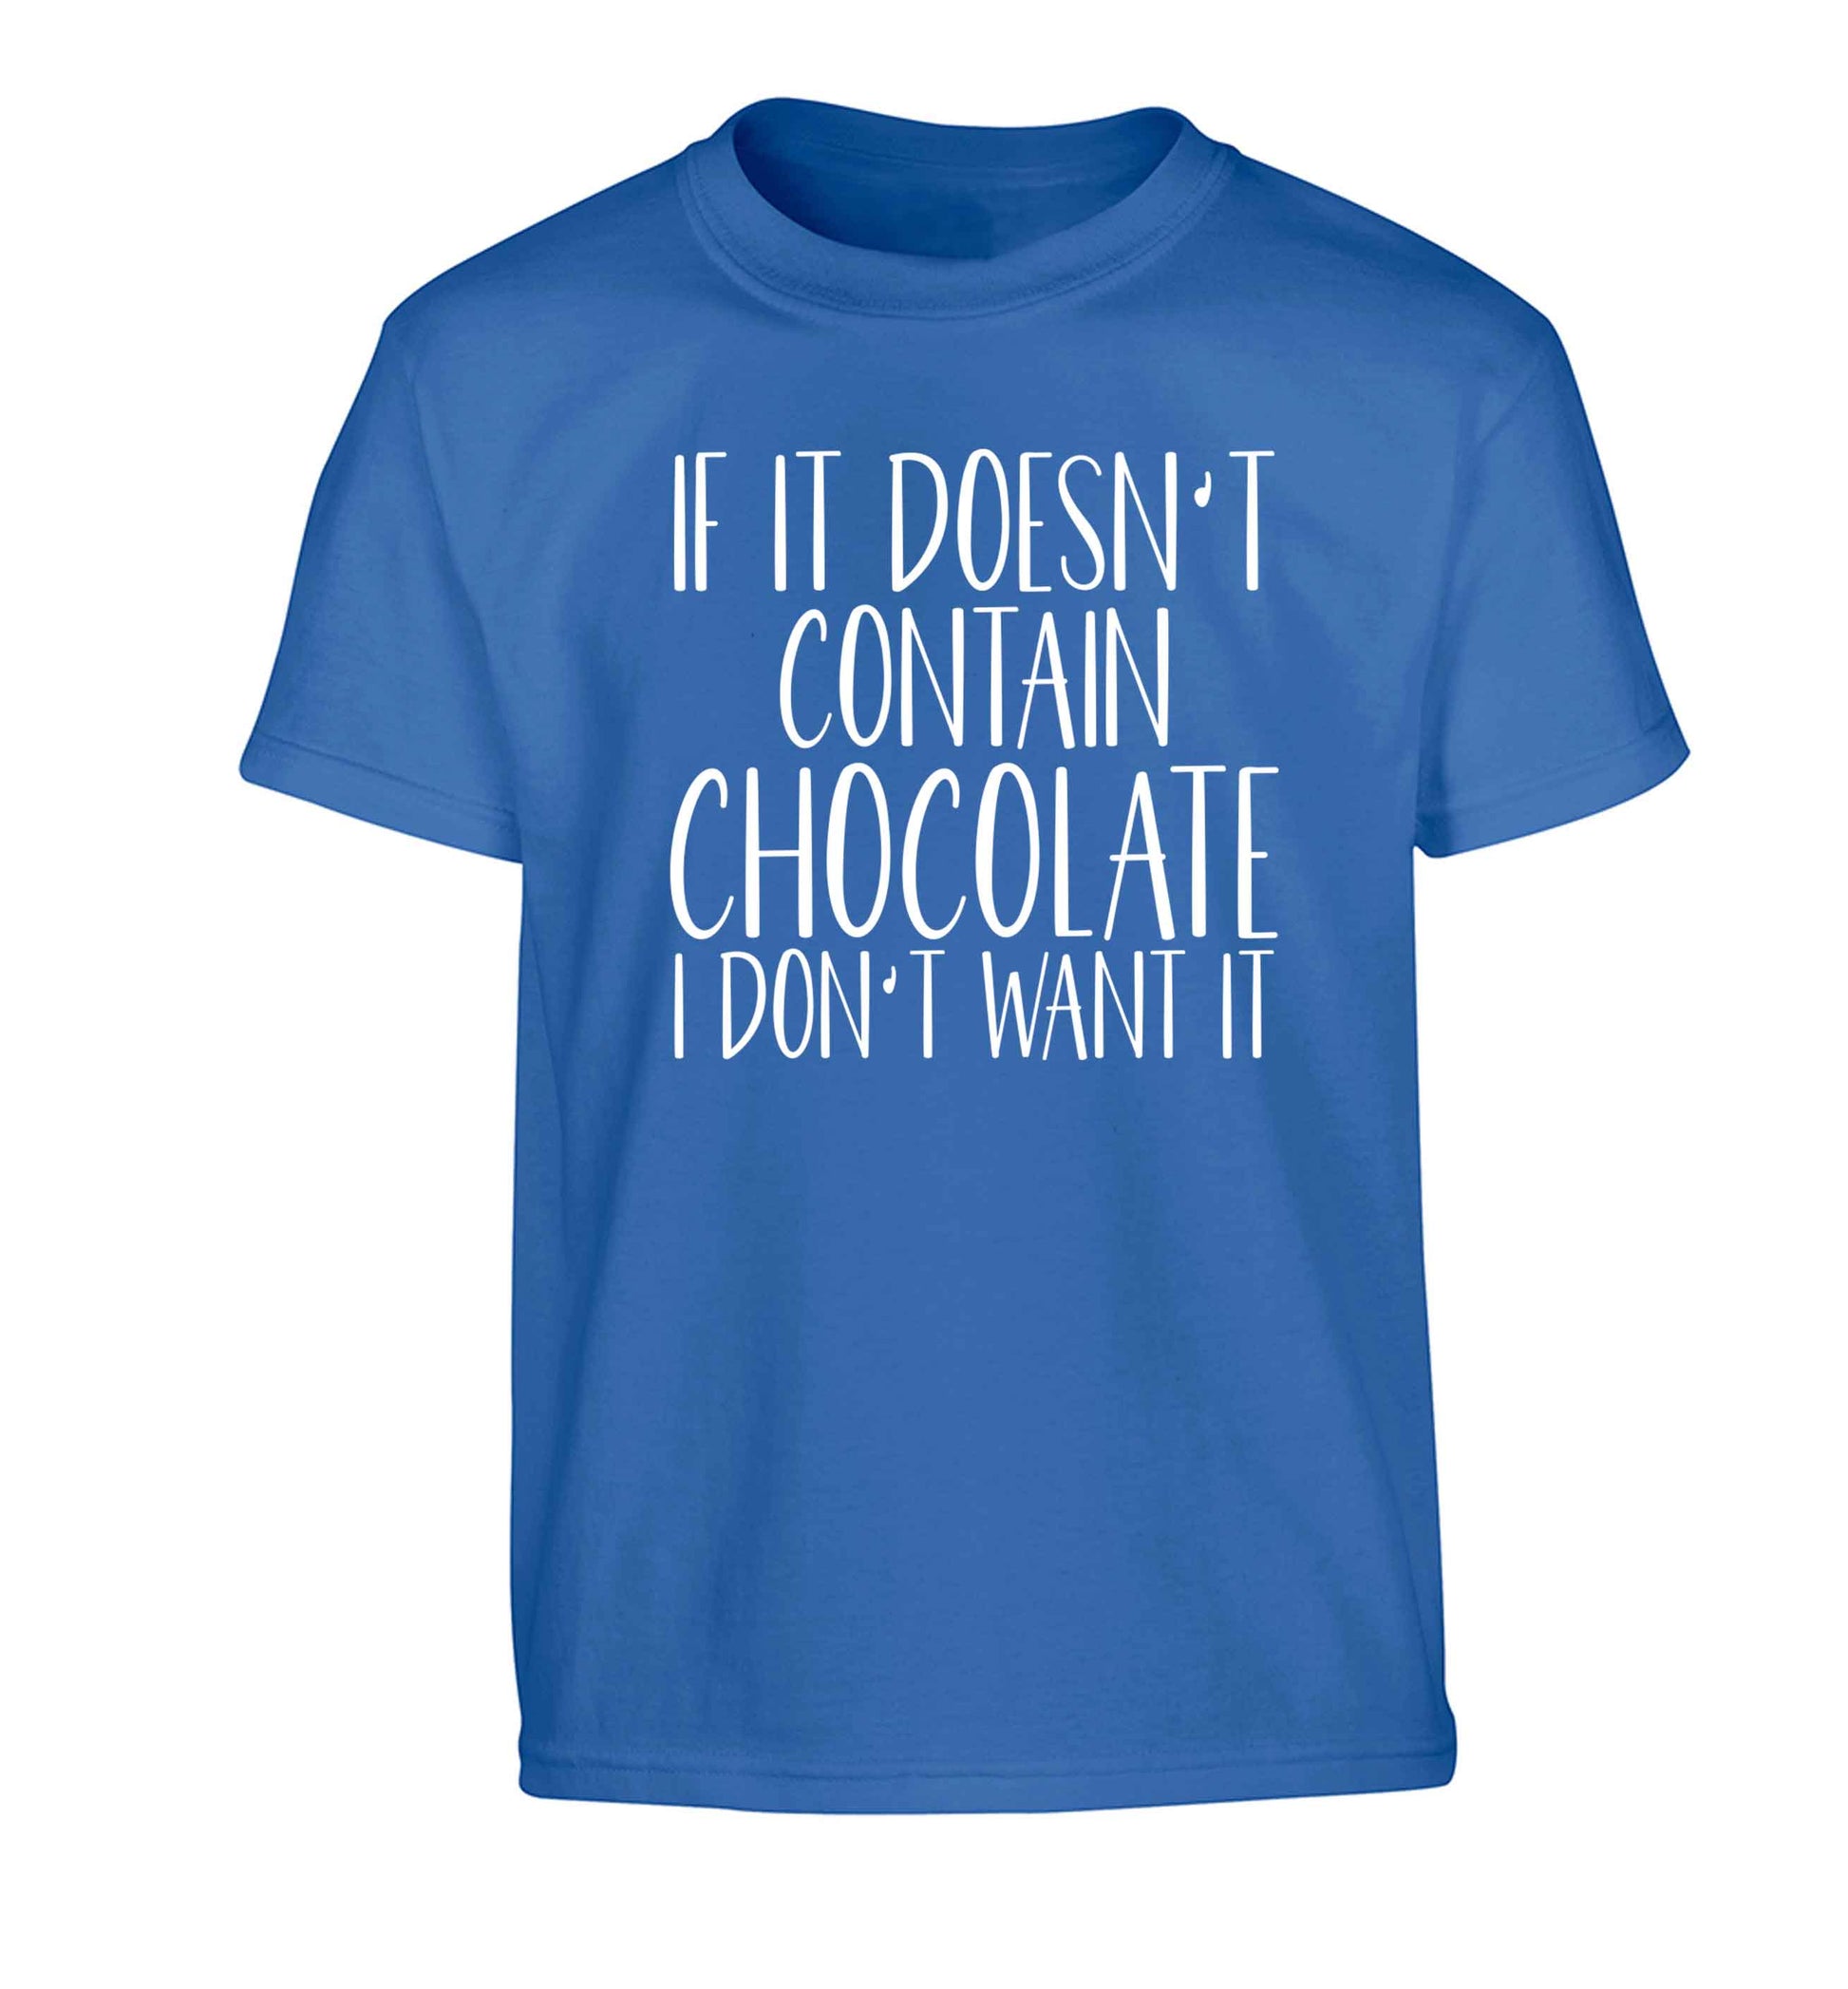 If it doesn't contain chocolate I don't want it Children's blue Tshirt 12-13 Years